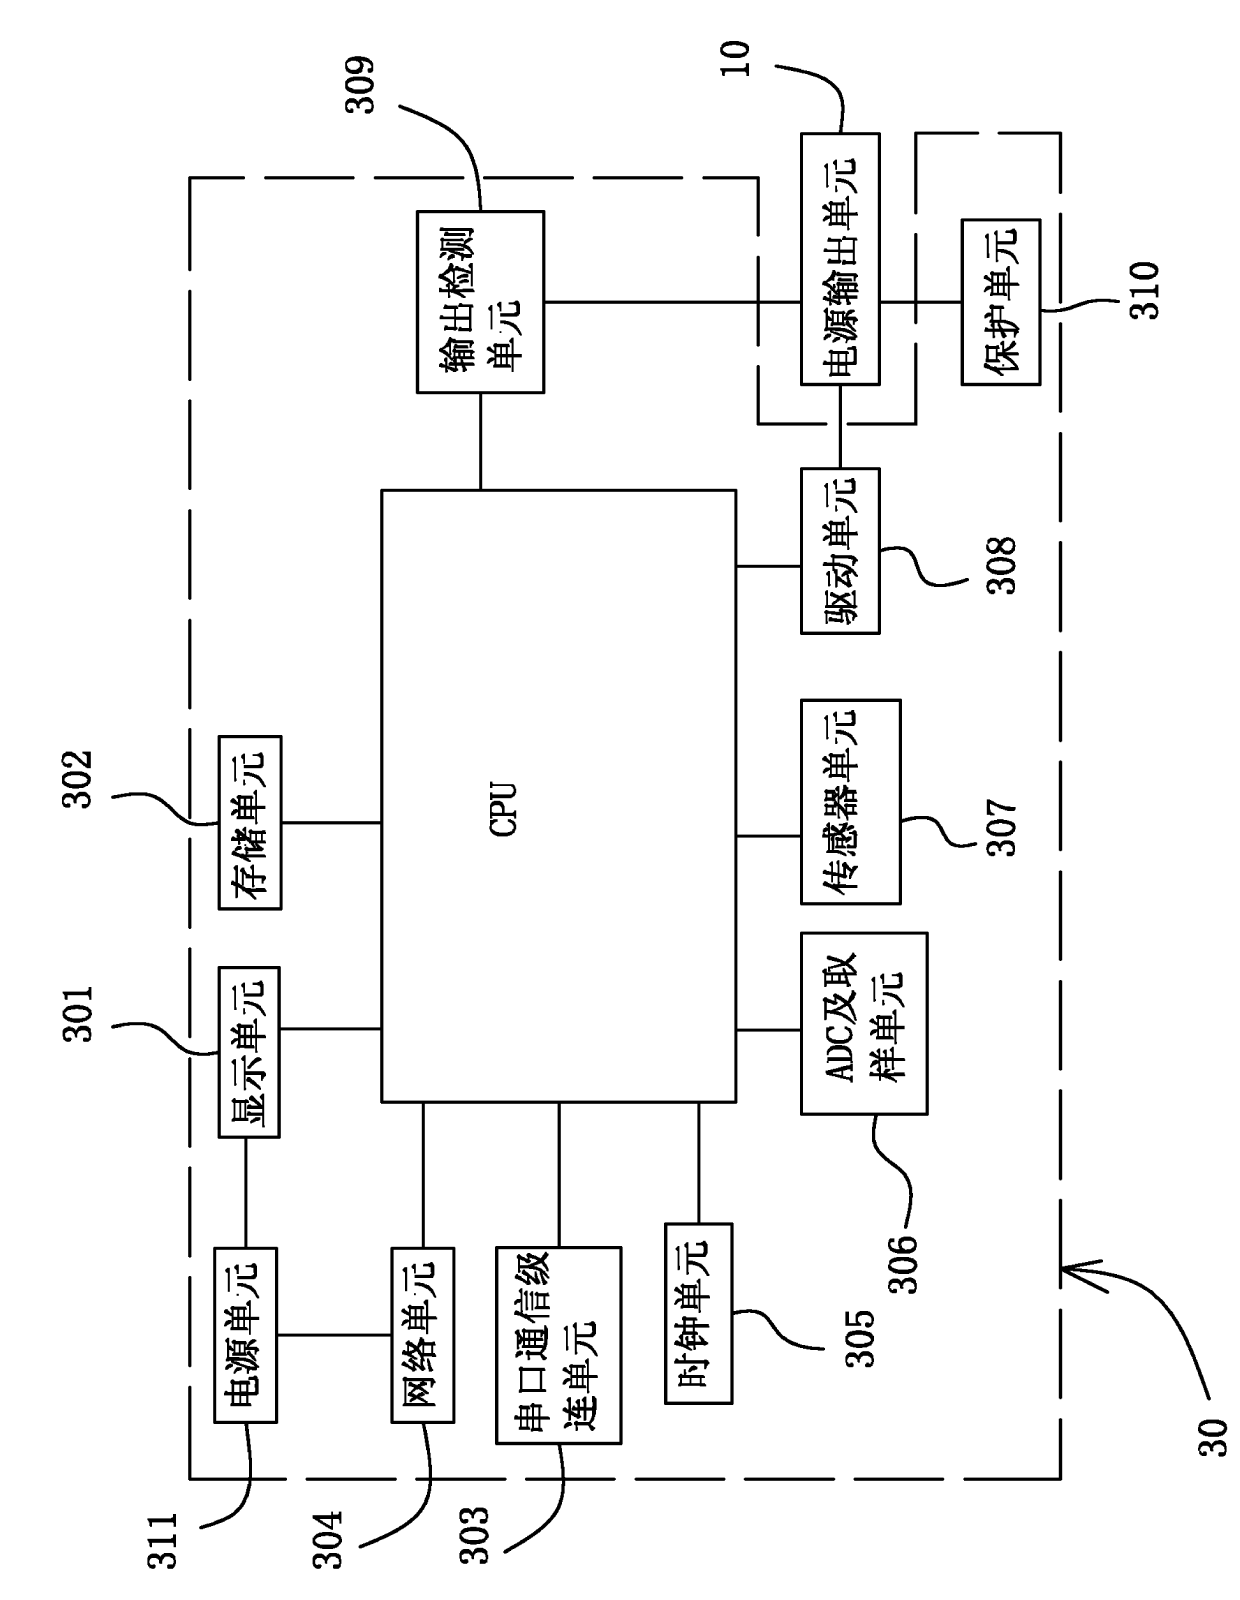 Power controller capable of being remotely managed